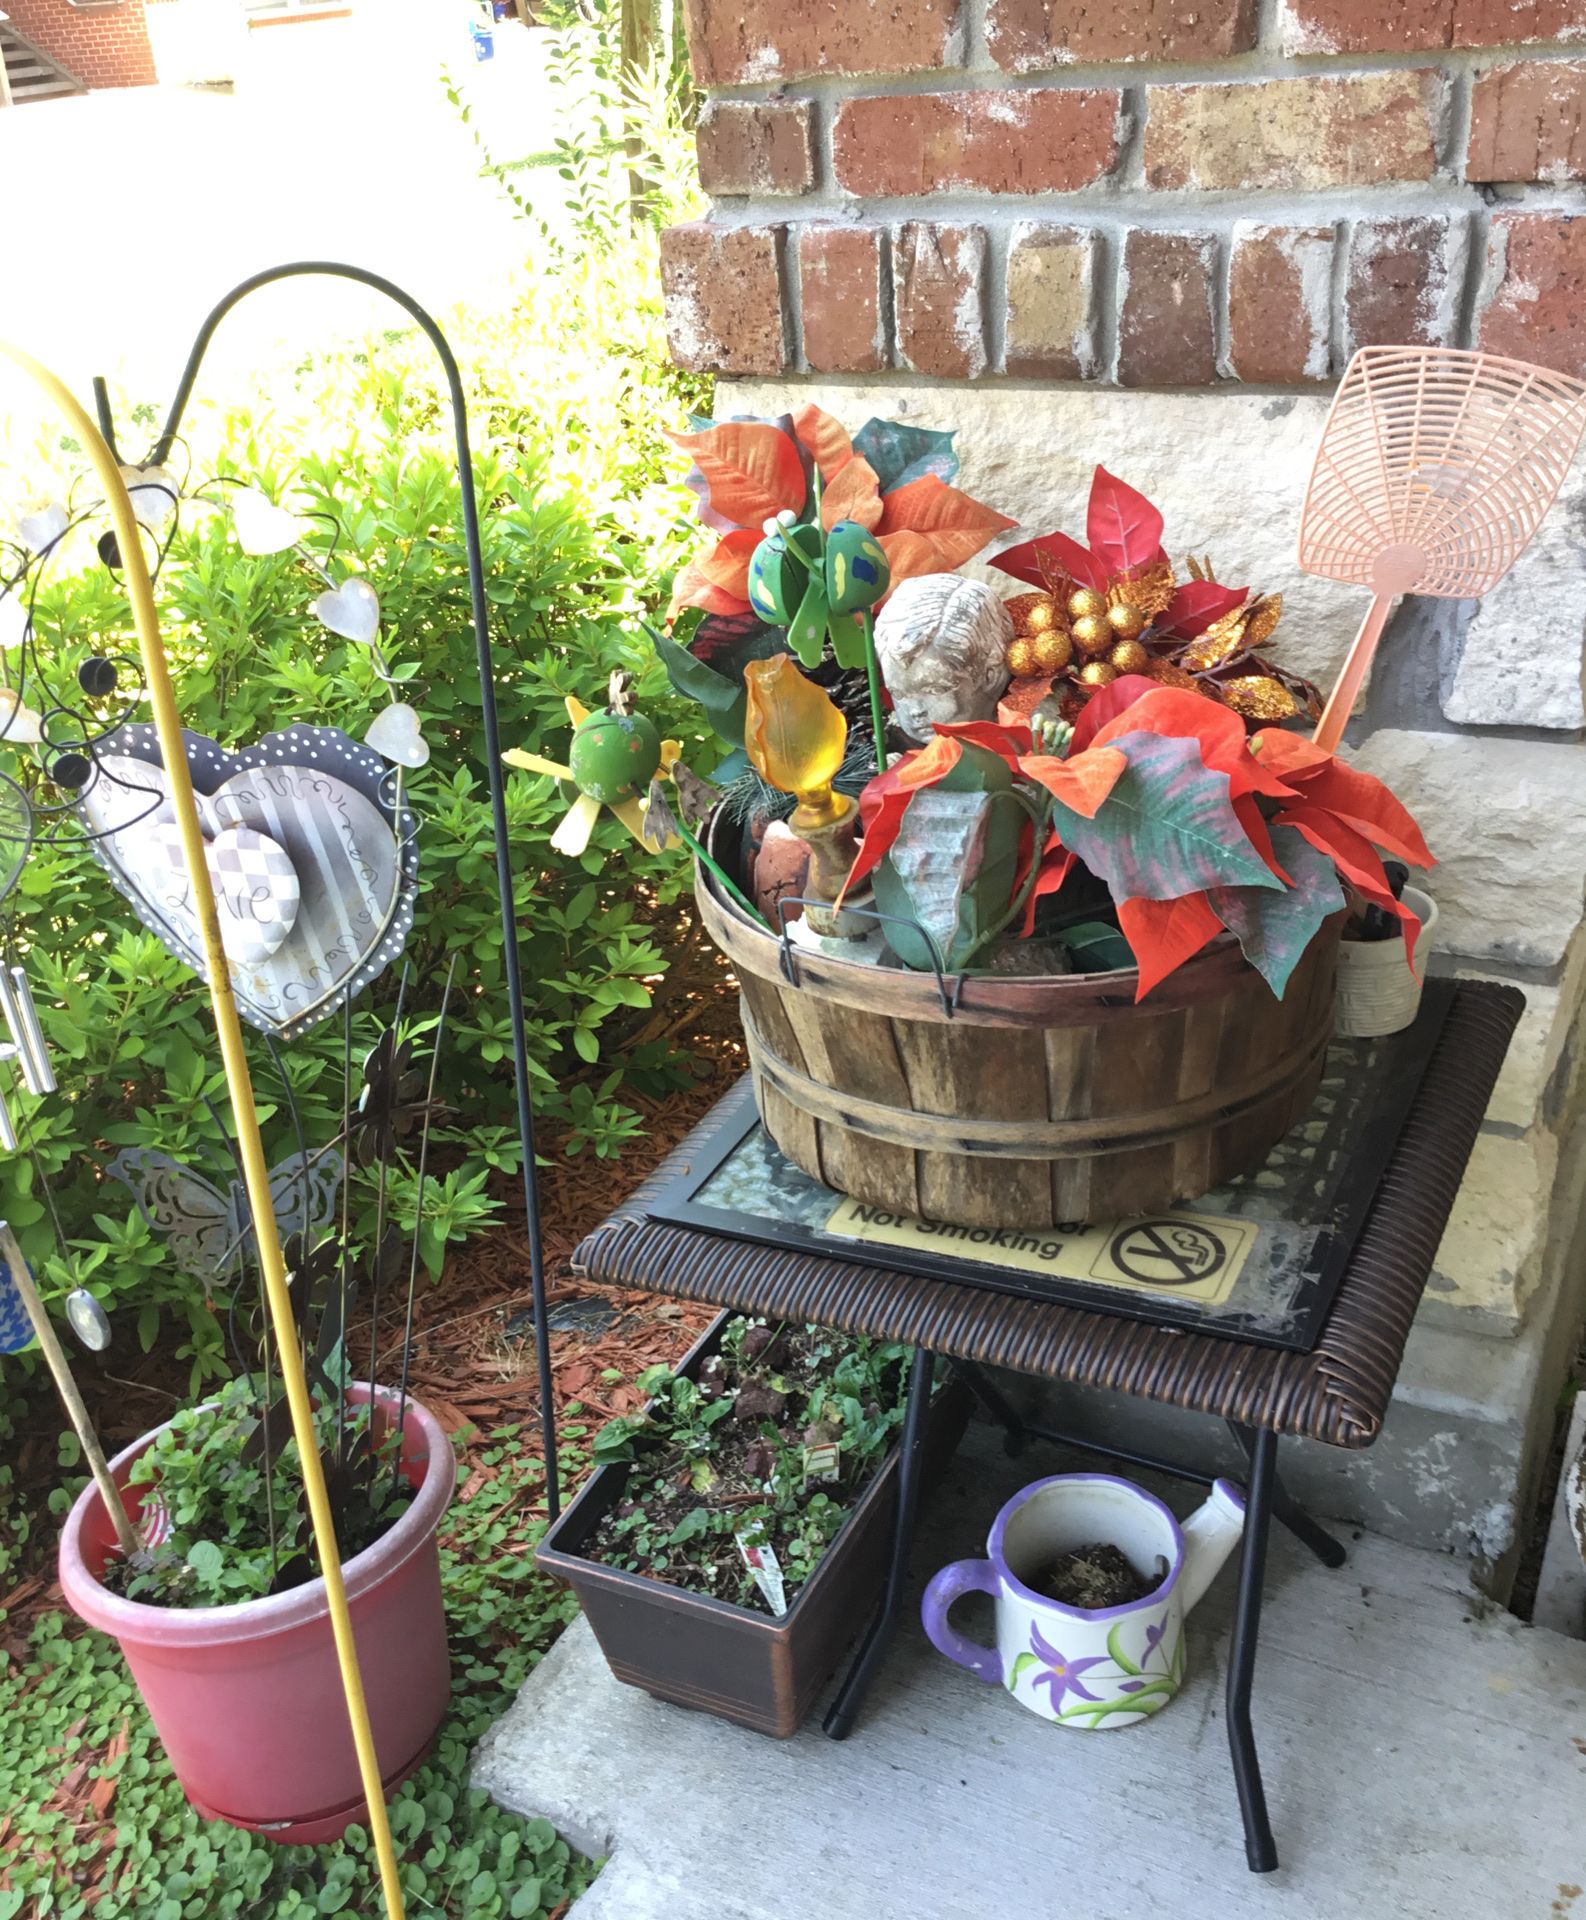 MIXED LOT OF GARDEN DECOR...SOLD SEPARATELY OR LOT OF YOUR CHOOSING...MOVING NEED FUNDS TO DO SO...THANK U...